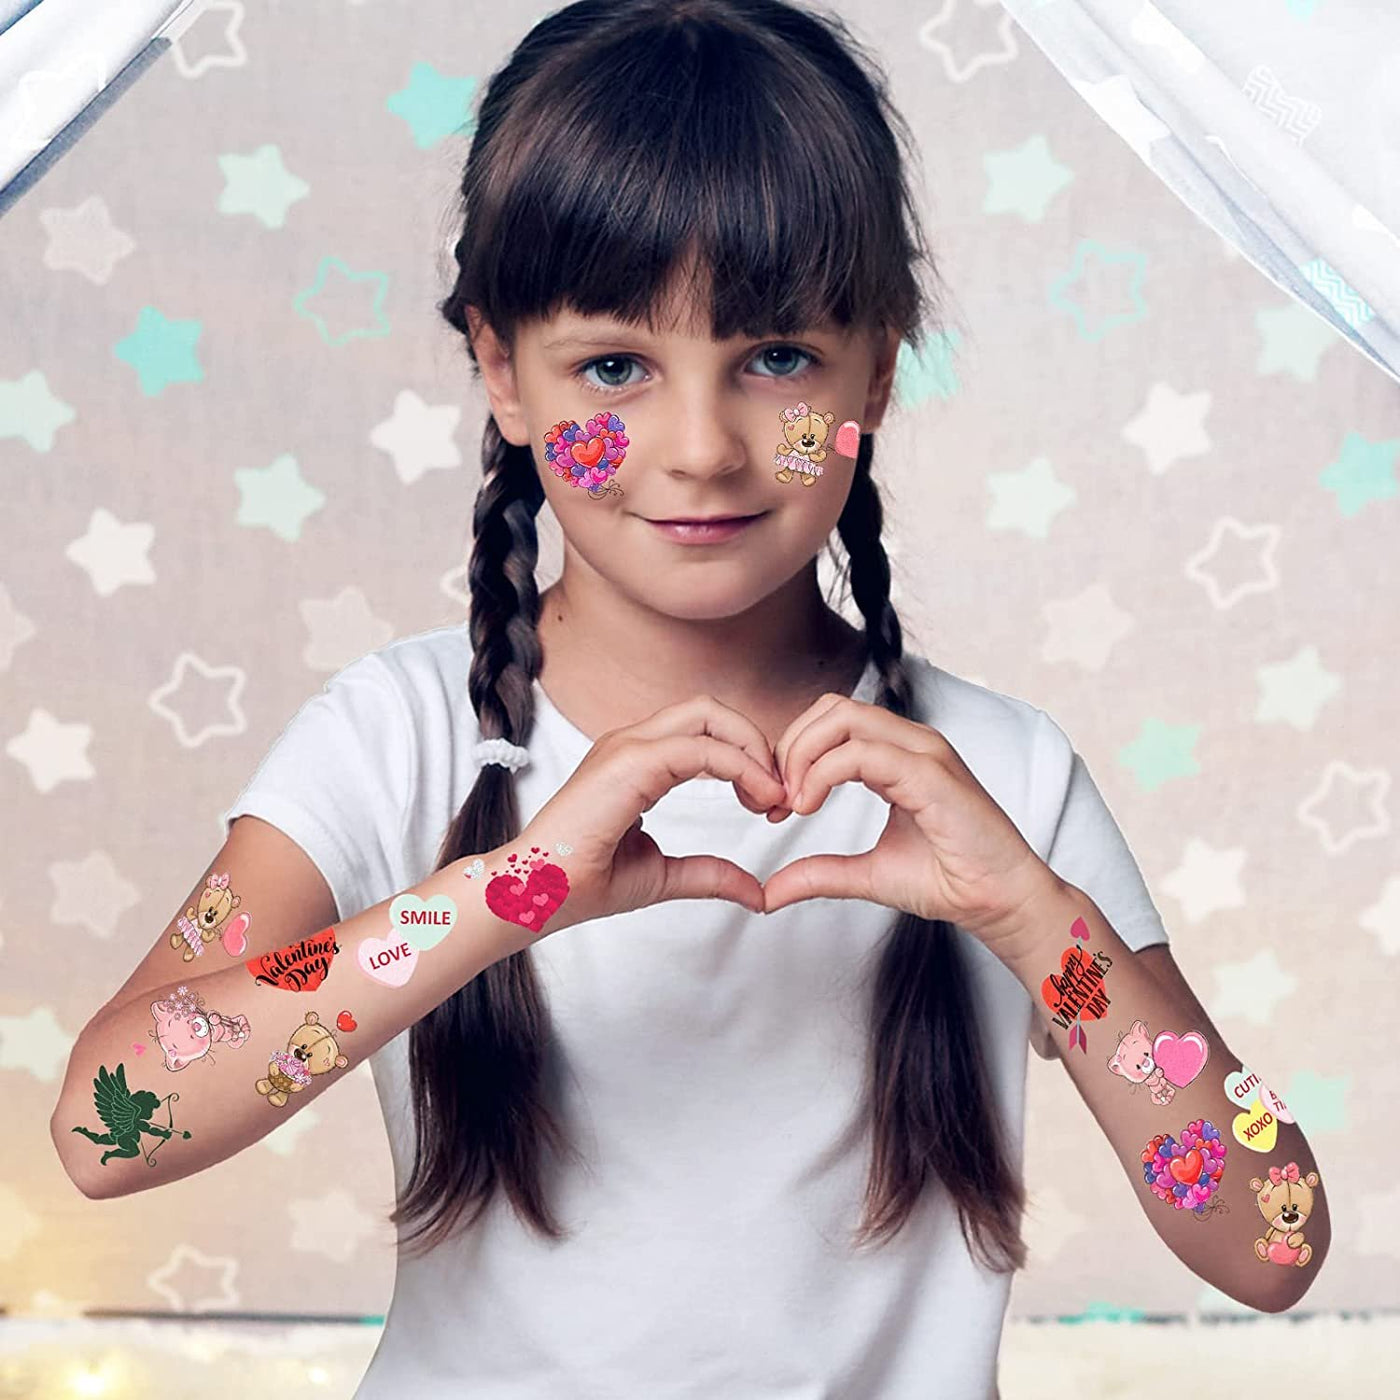 ArtCreativity Valentines Glitter Tattoos for Kids, 144 Pack, Temporary Tattoo Valentines Day Party Favors in 12 Cute Designs, Valentines Gifts for Kids, Class Rewards, and Goodie Bag Fillers